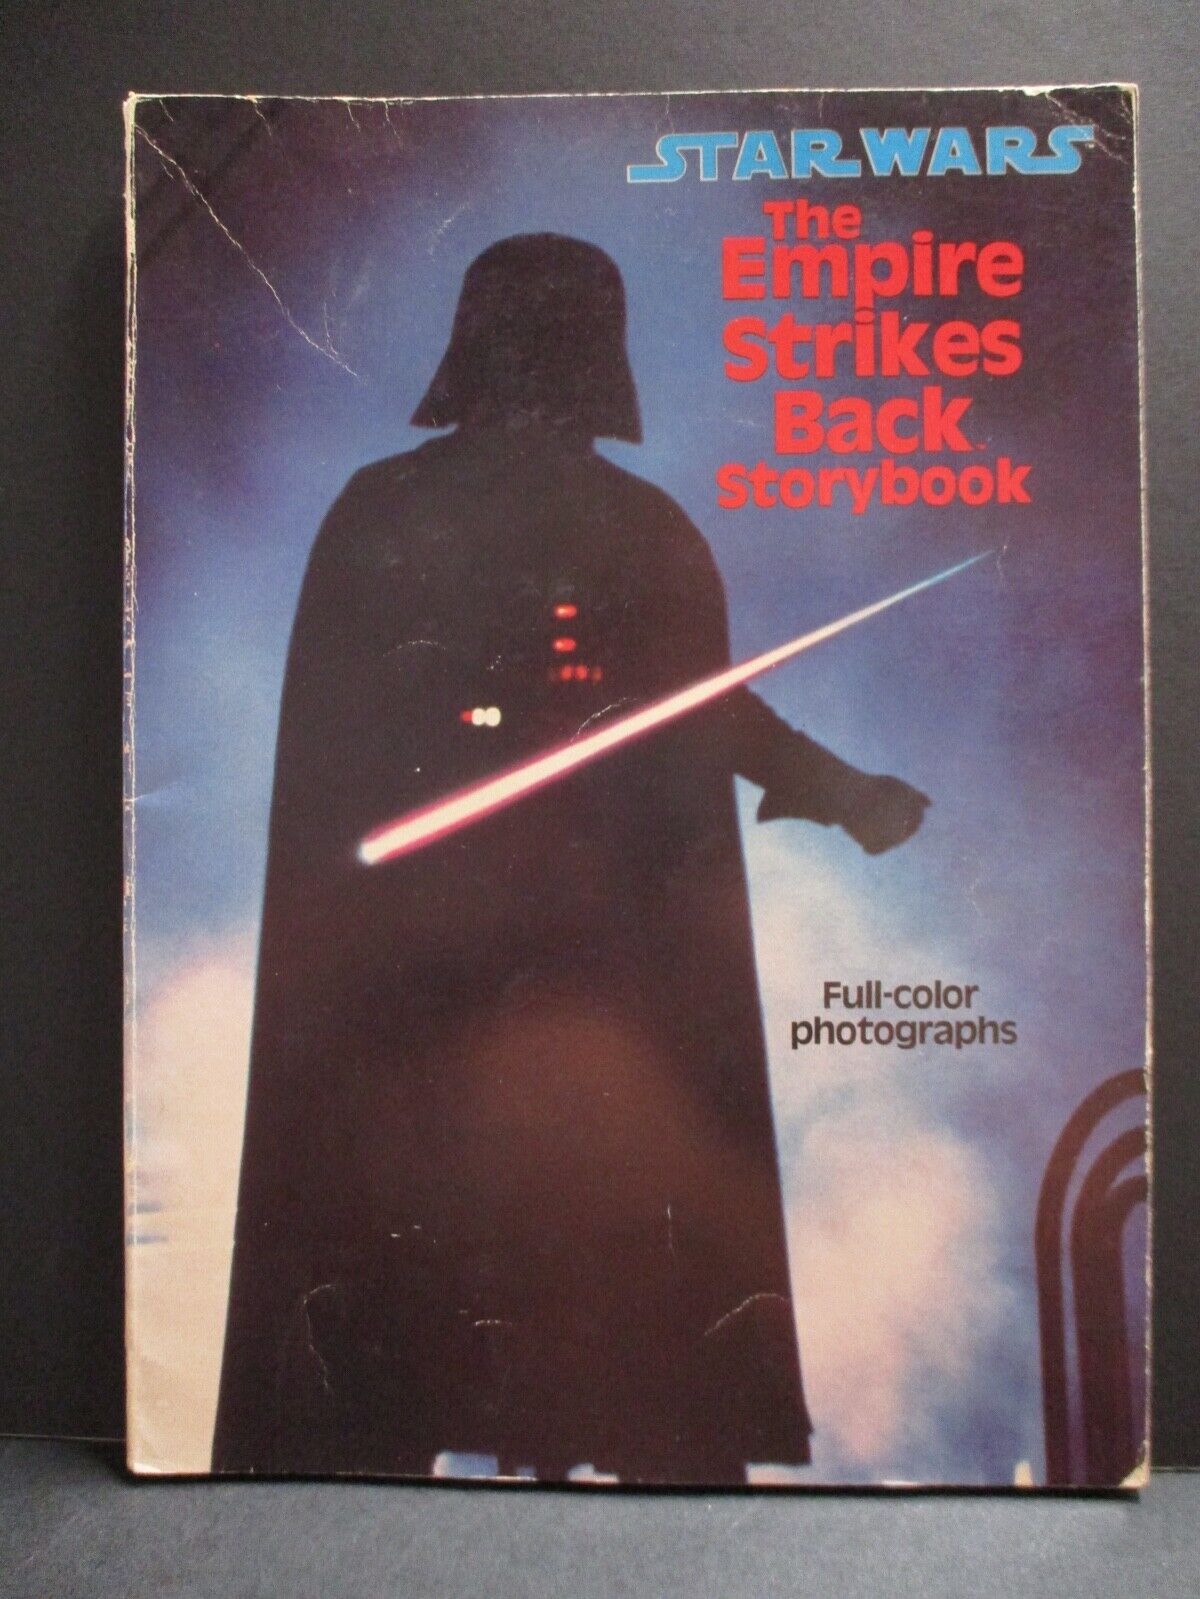 Star Wars The Empire Strikes Back Story book with full color photos VG cond.